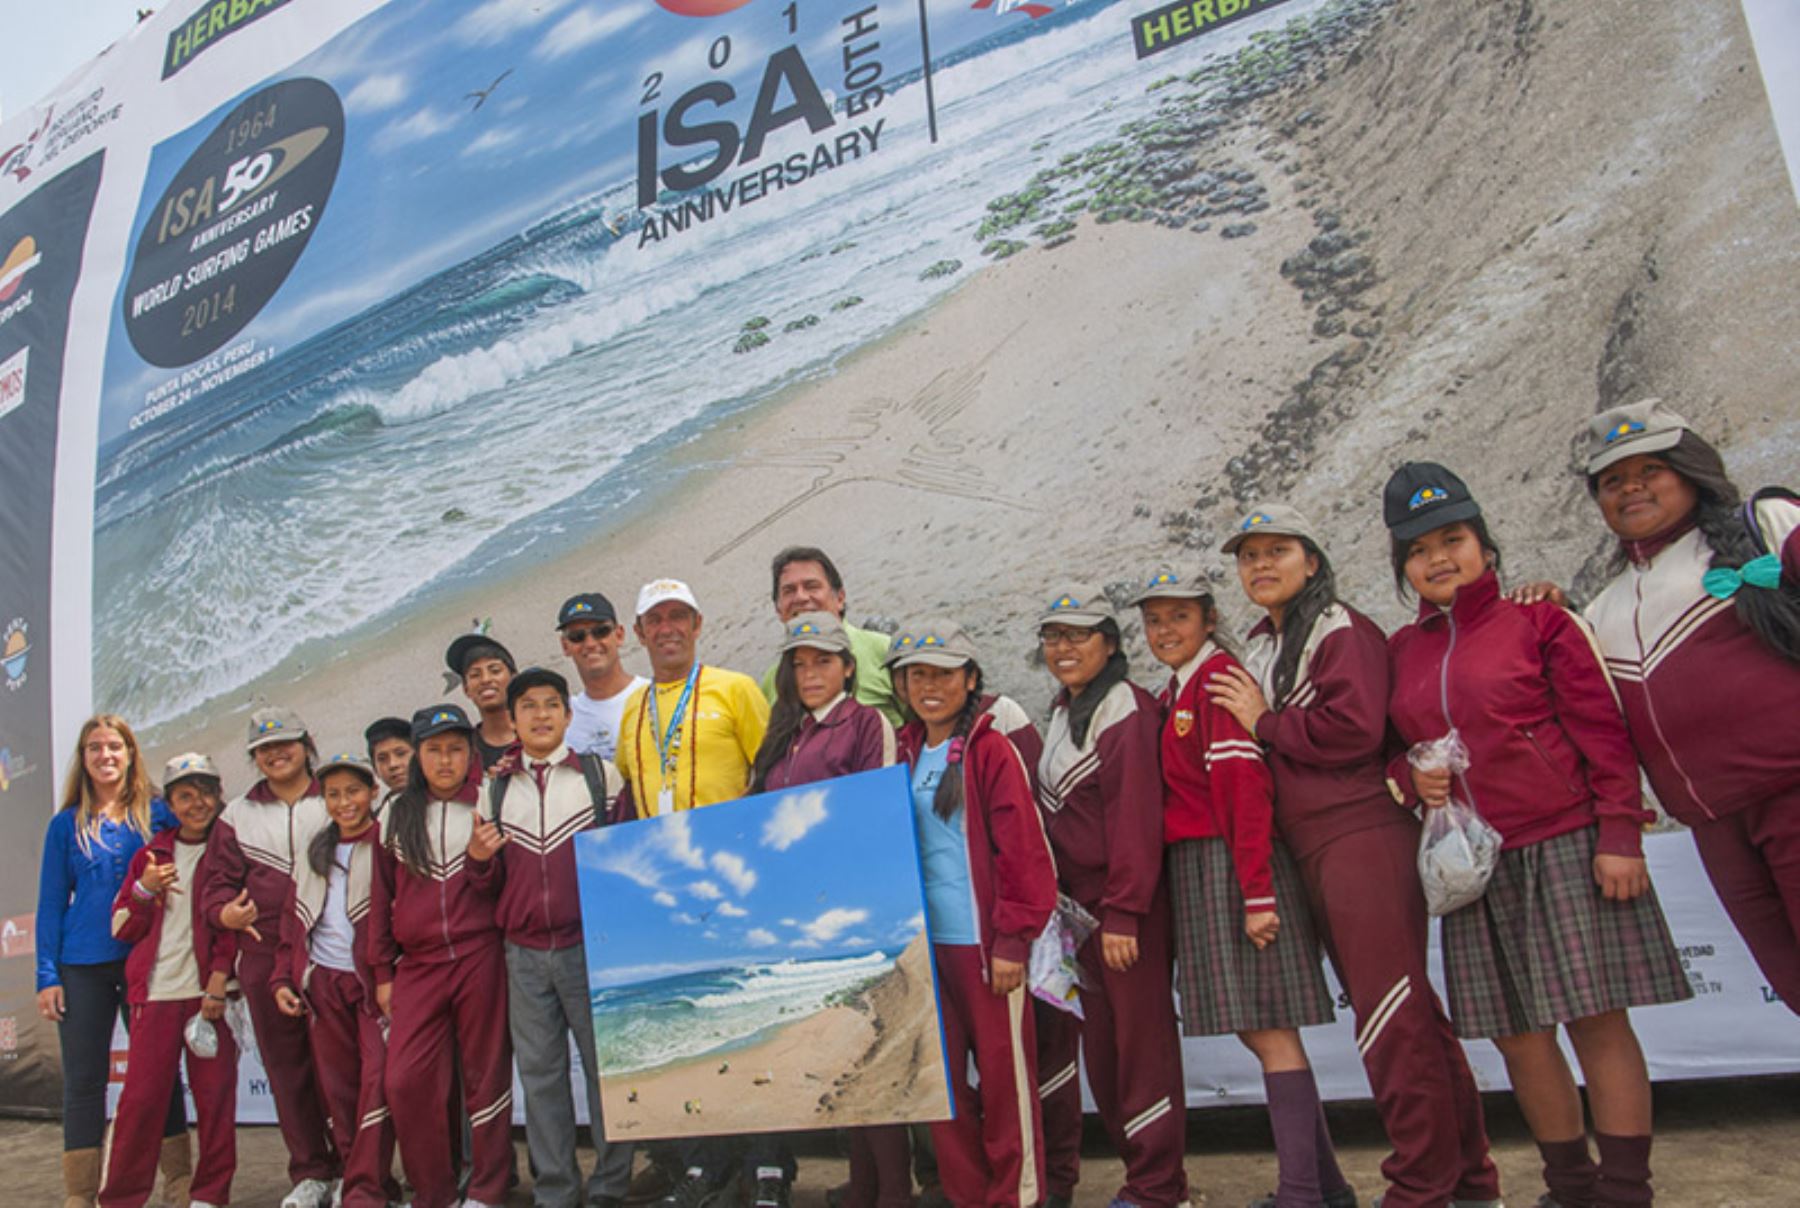 Painting to be auctioned in favor of surf school children in Peru